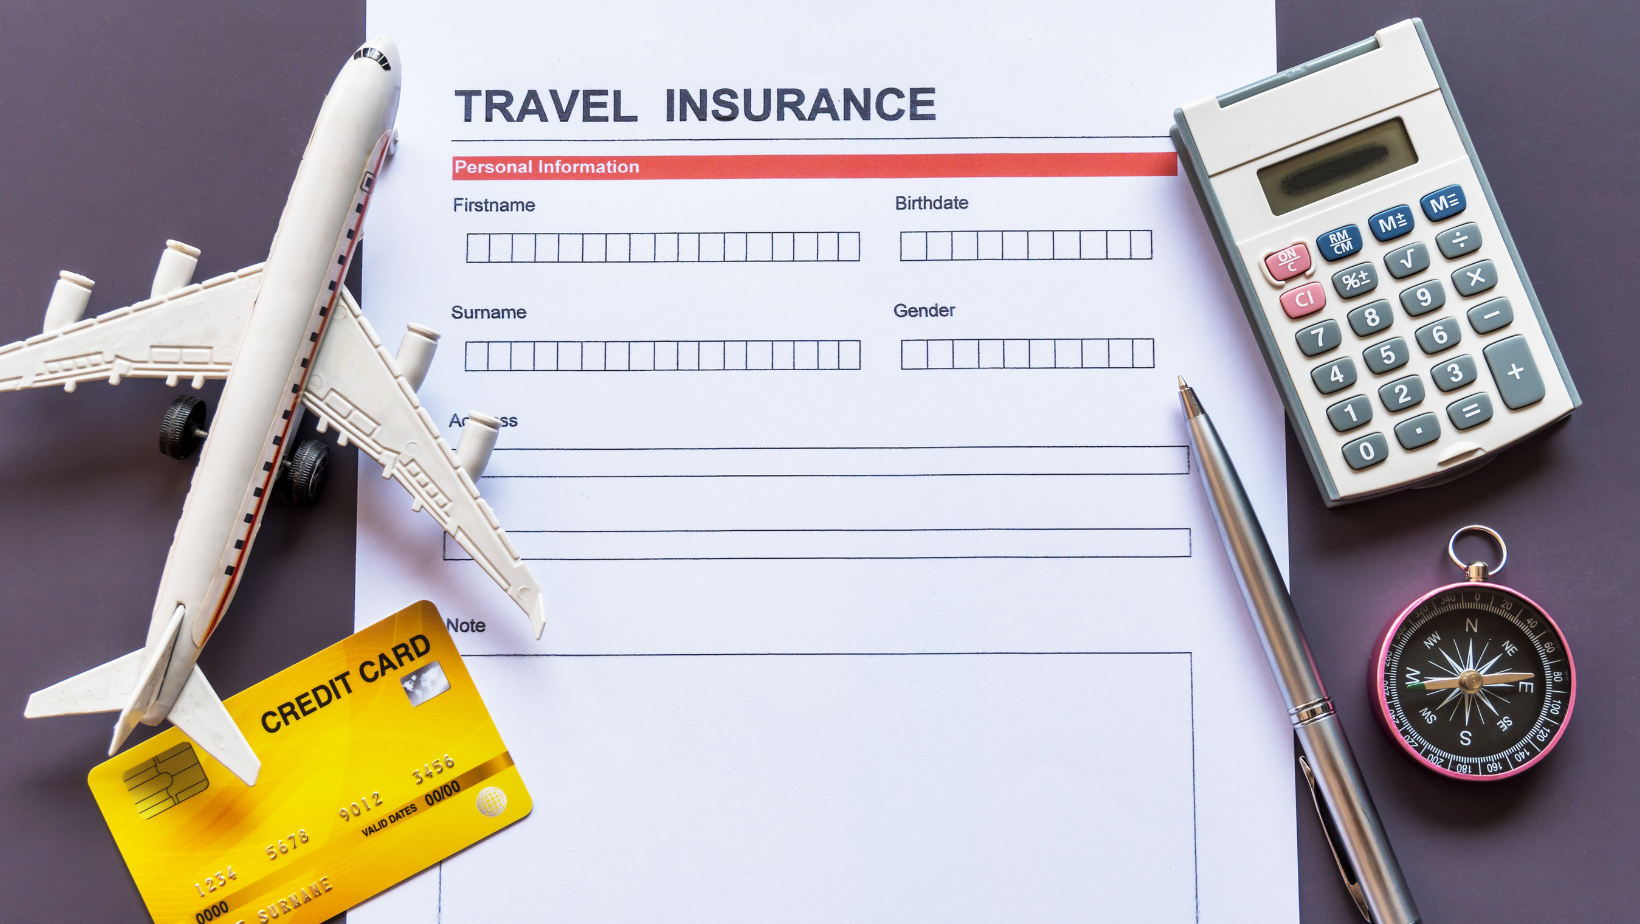 Types of aviation insurance policies